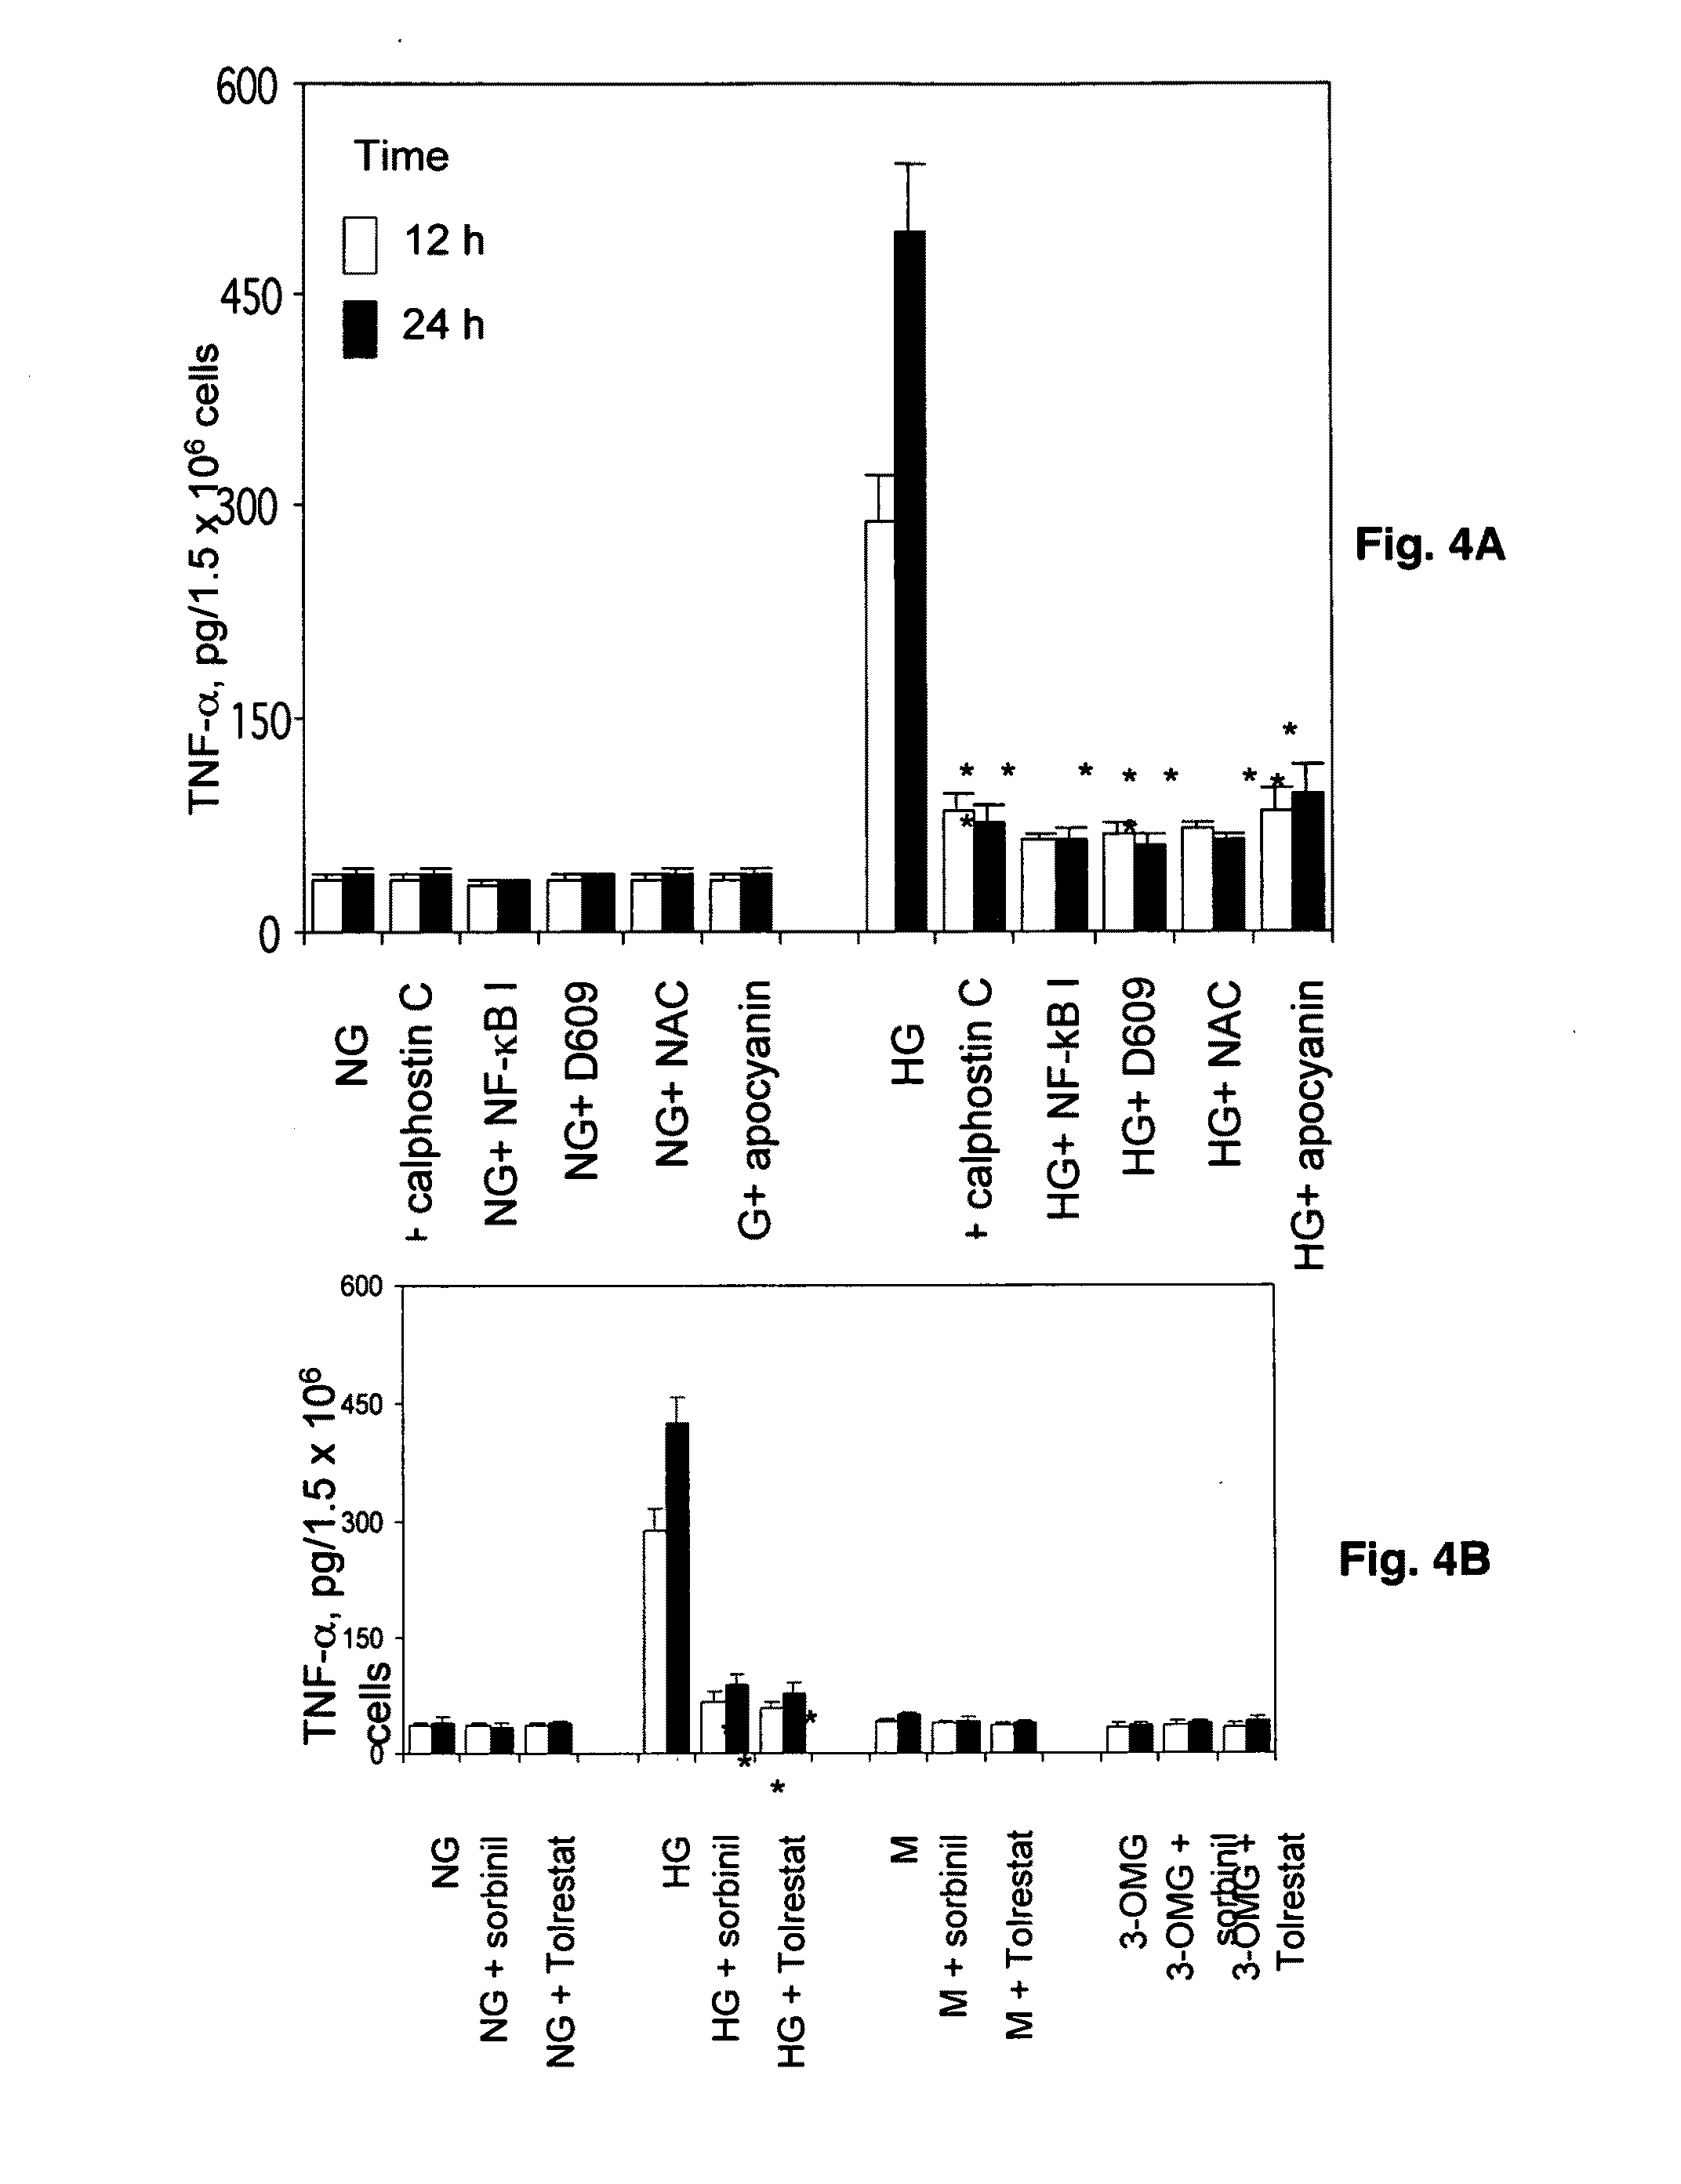 Treatment of cancer with aldose reductase inhibitors